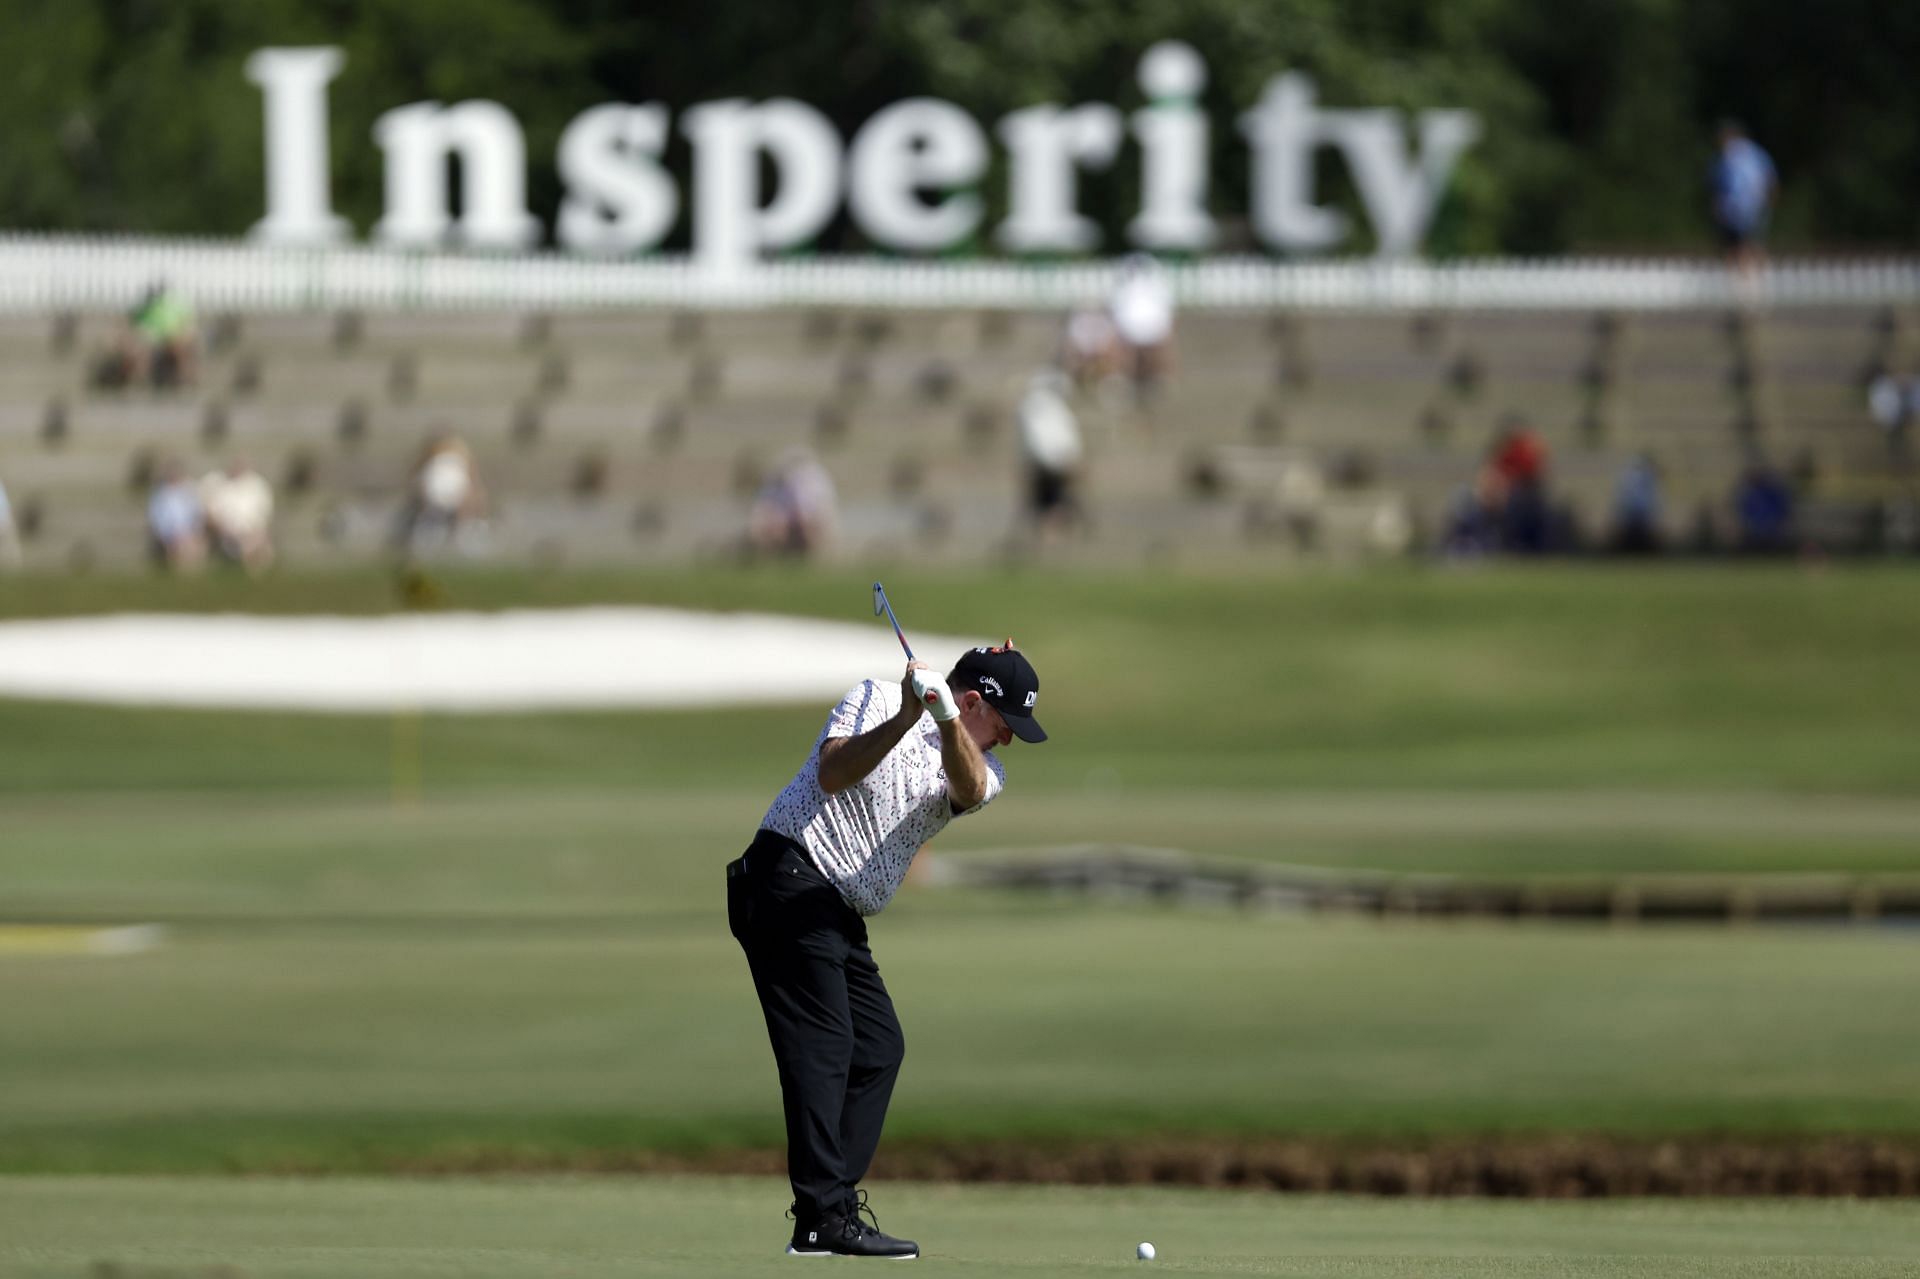 Where is Insperity Invitational golf tournament held? Exploring the